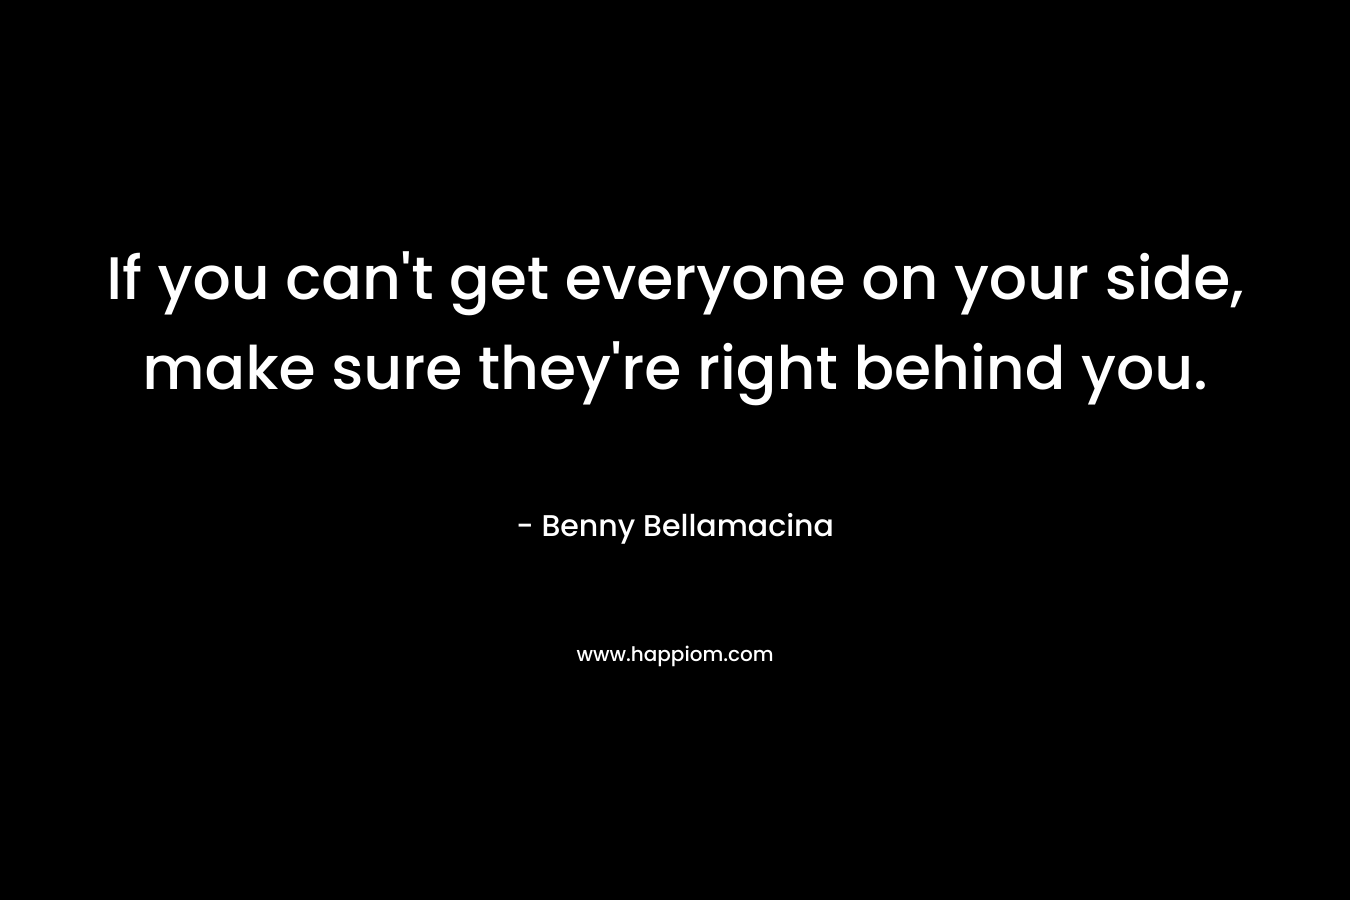 If you can’t get everyone on your side, make sure they’re right behind you. – Benny Bellamacina